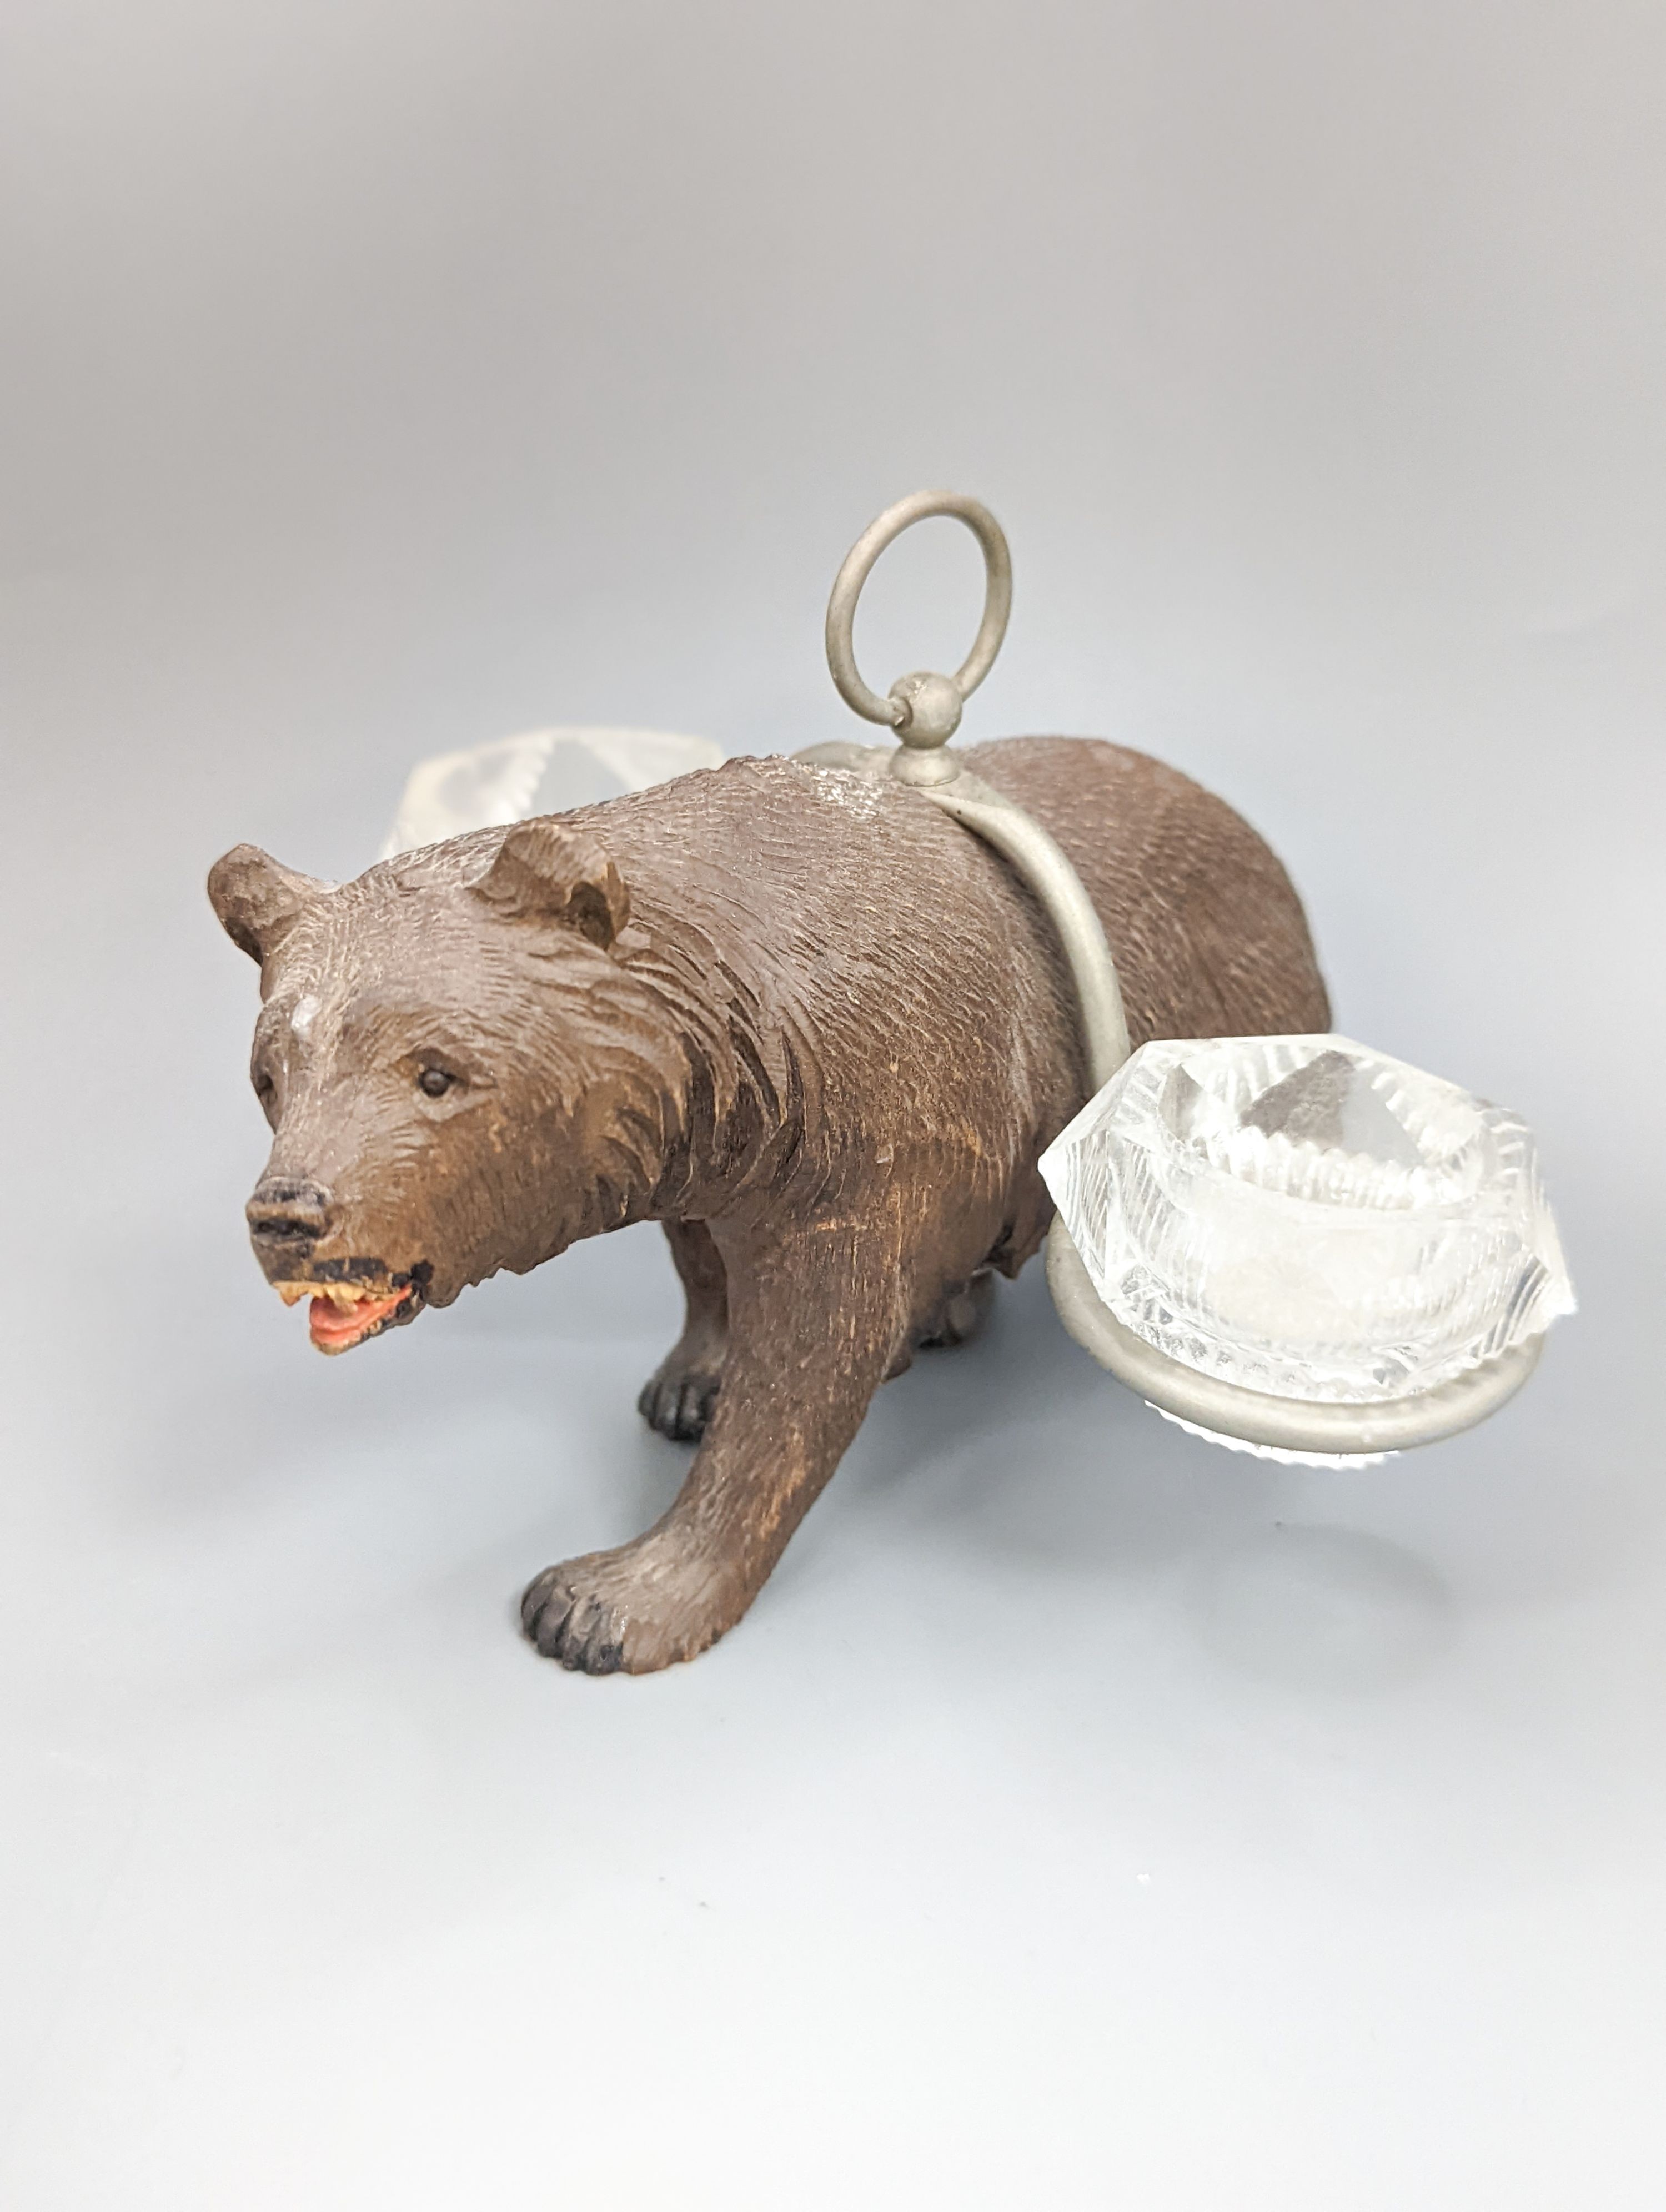 A Black forest carved bear cruet, width 13cm, and a similar stampbox, early 20th century